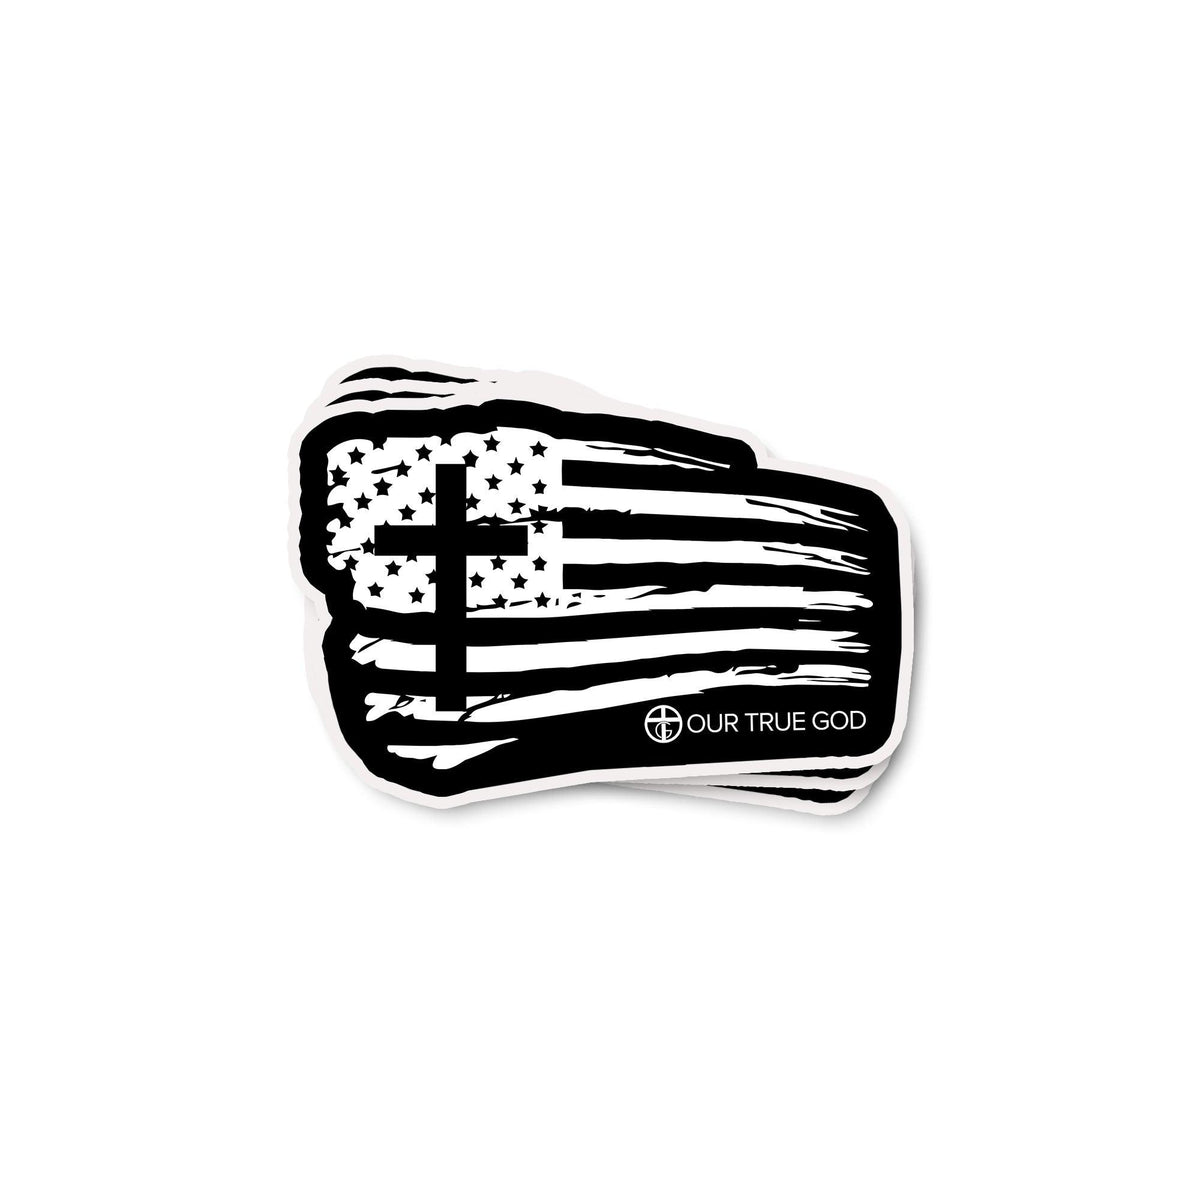 Tattered Flag Decals - Our True God